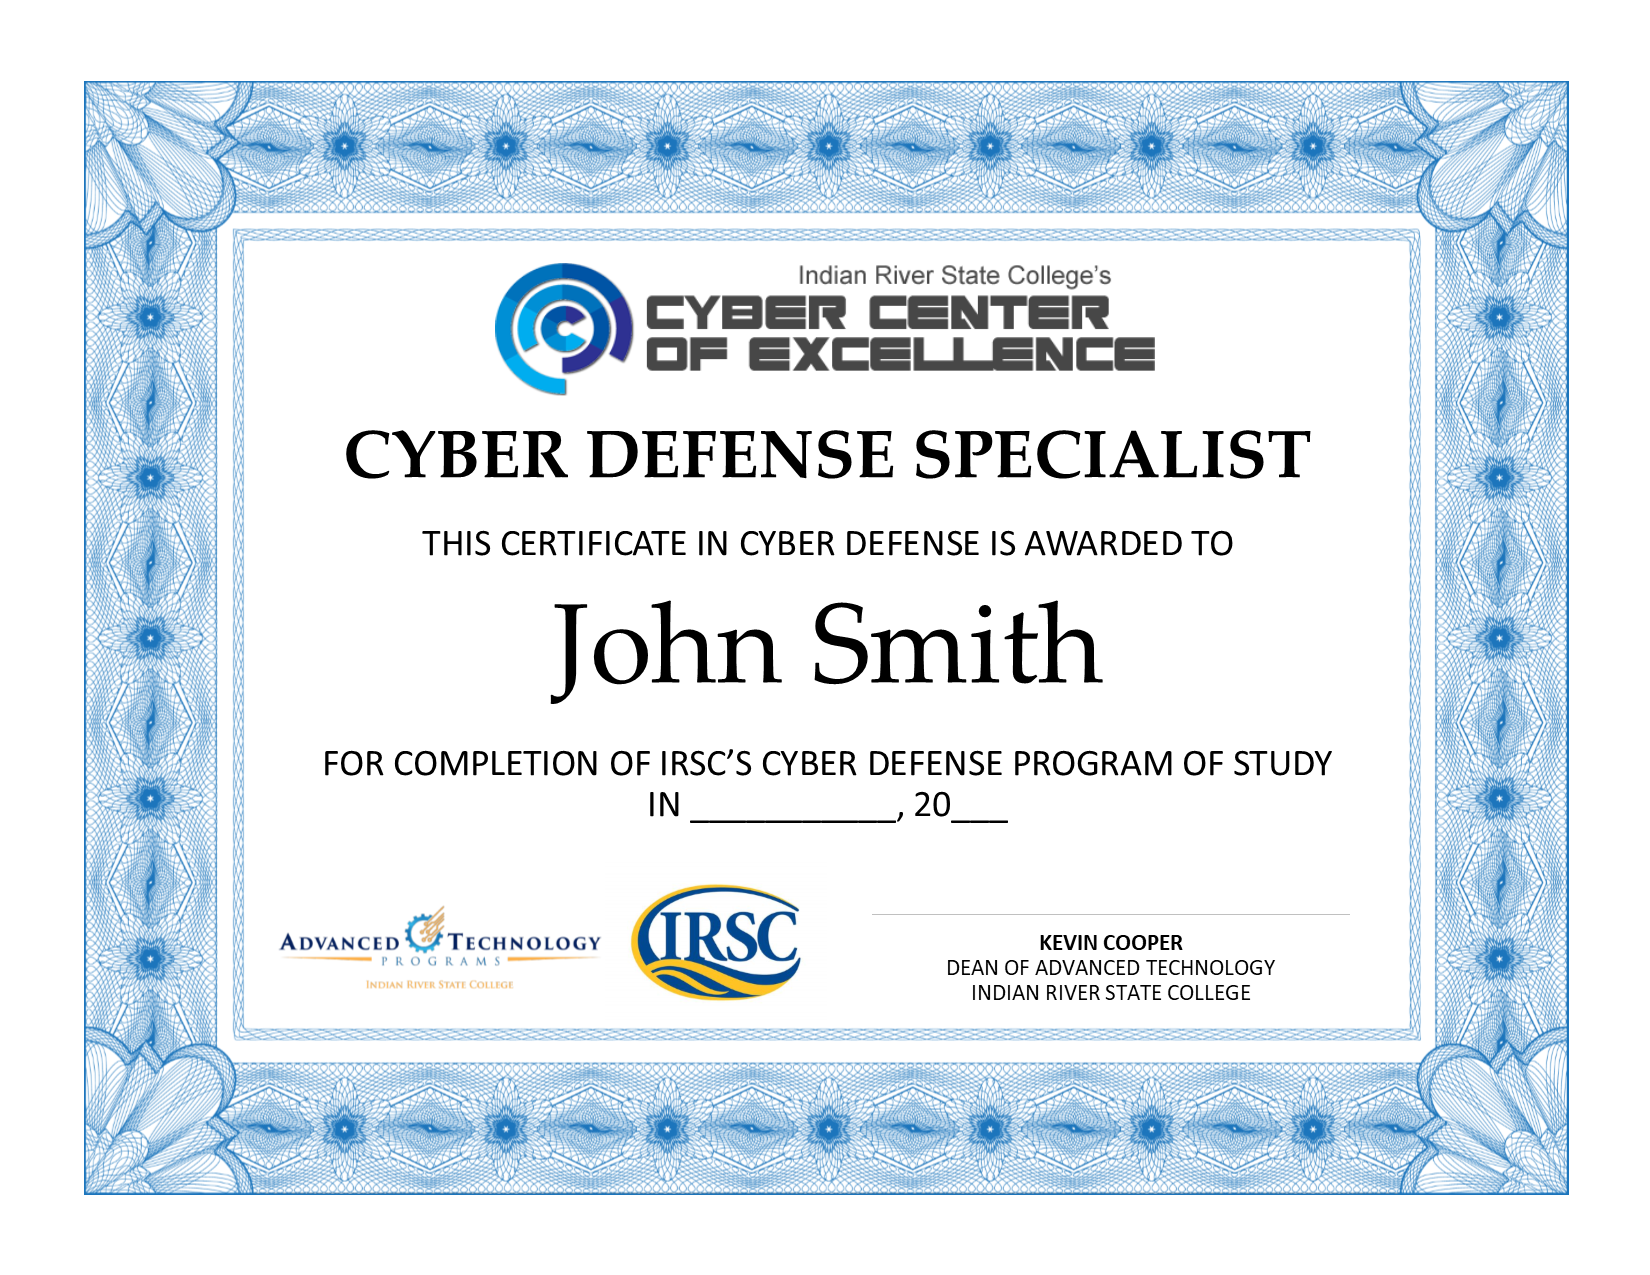 IRSC now offering a Cyber Defense Specialist certificate Cyber Center